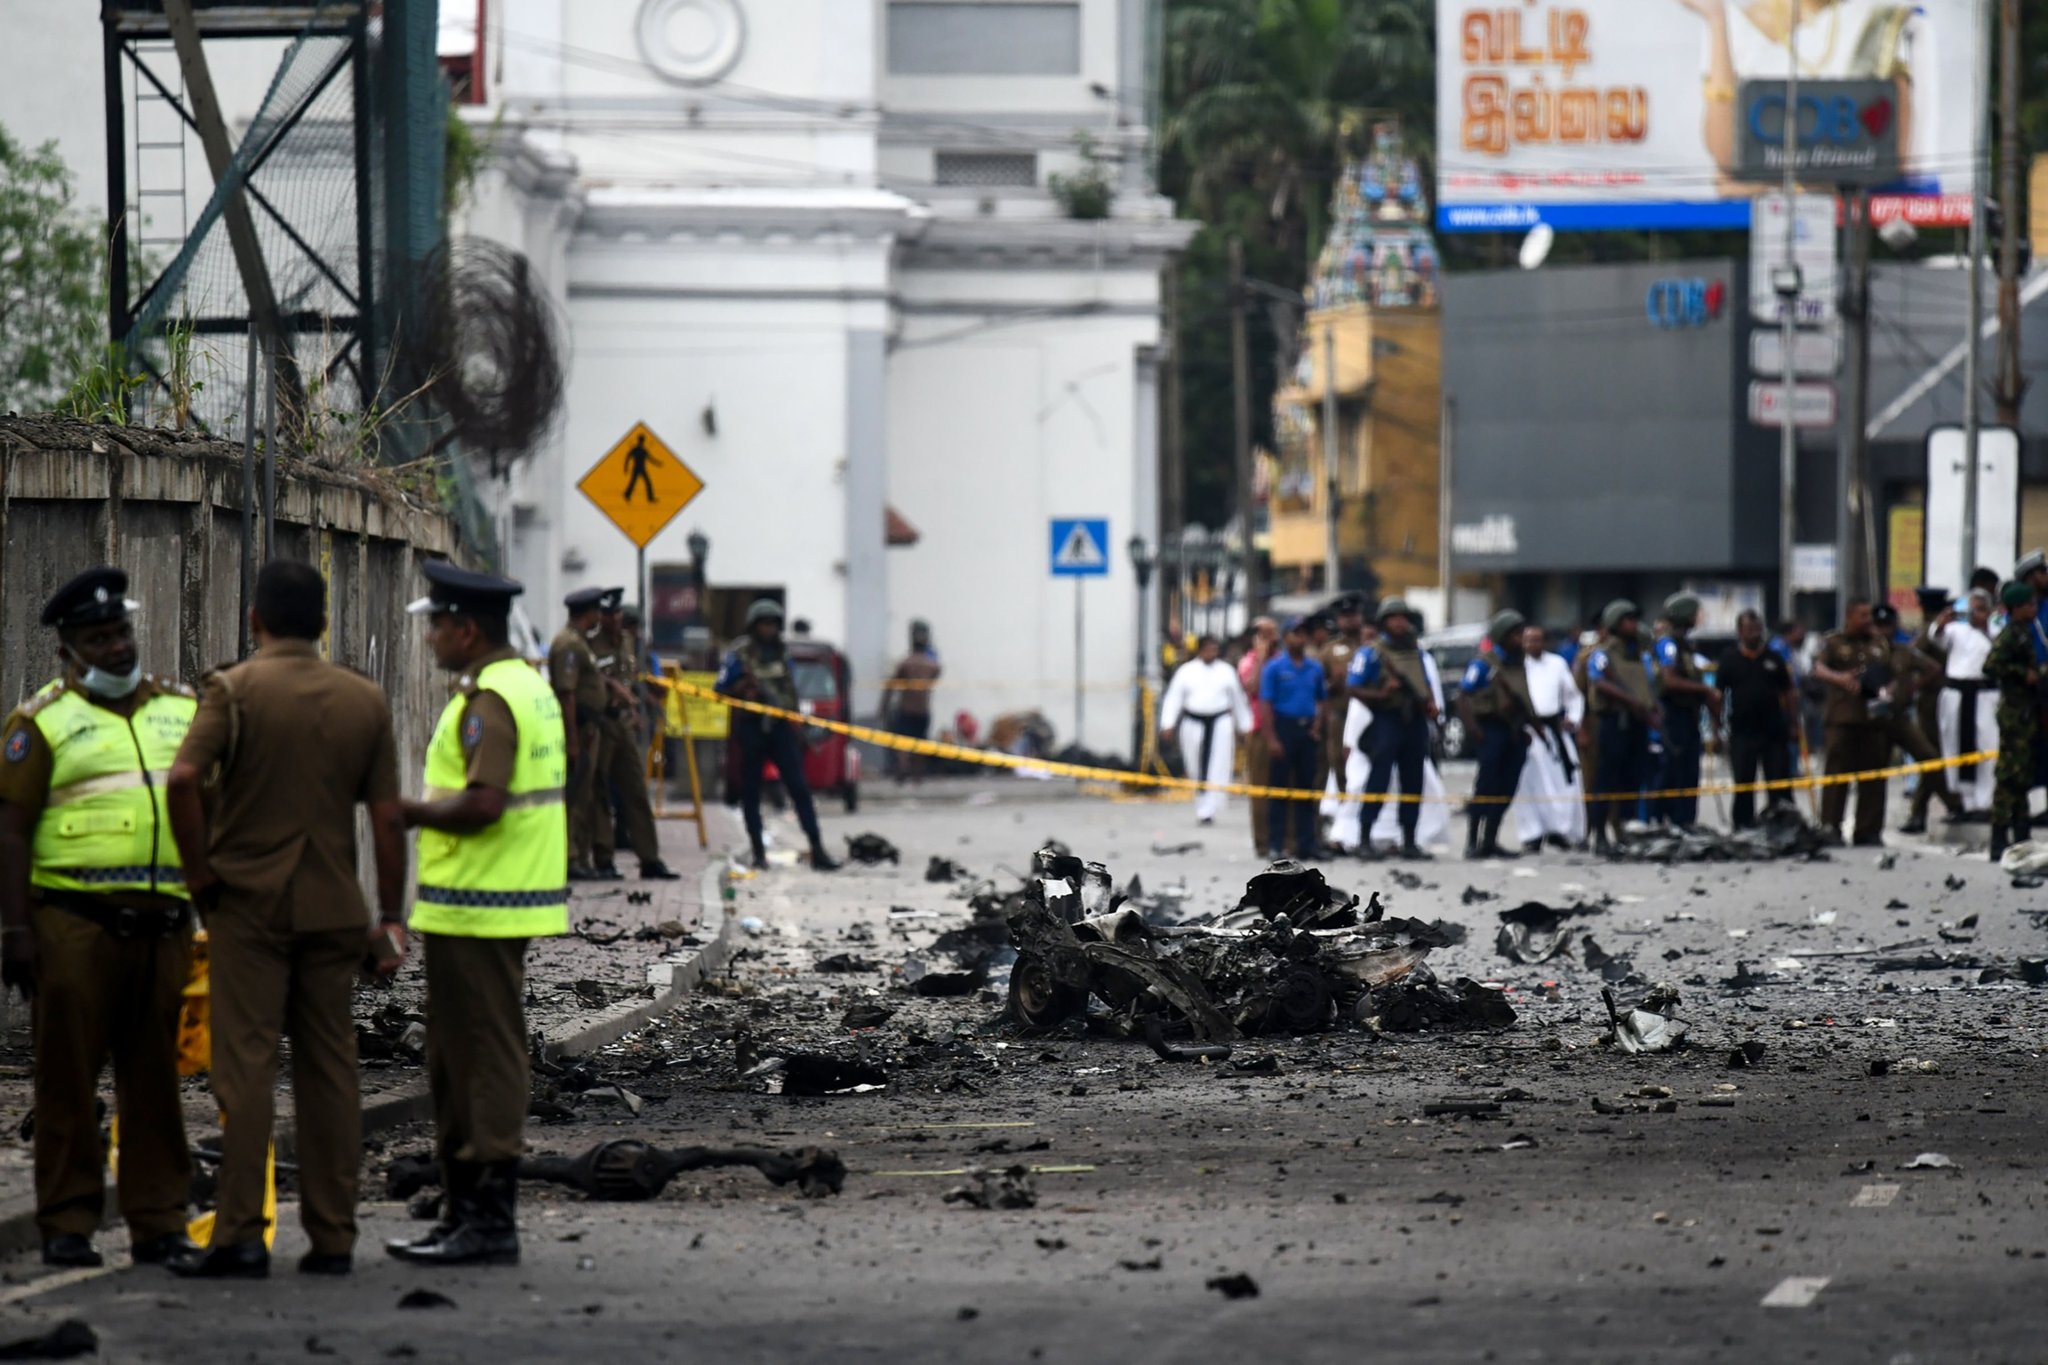 Sri Lanka Police Arrest 40 as Death Toll from Sunday Blasts Reaches 310